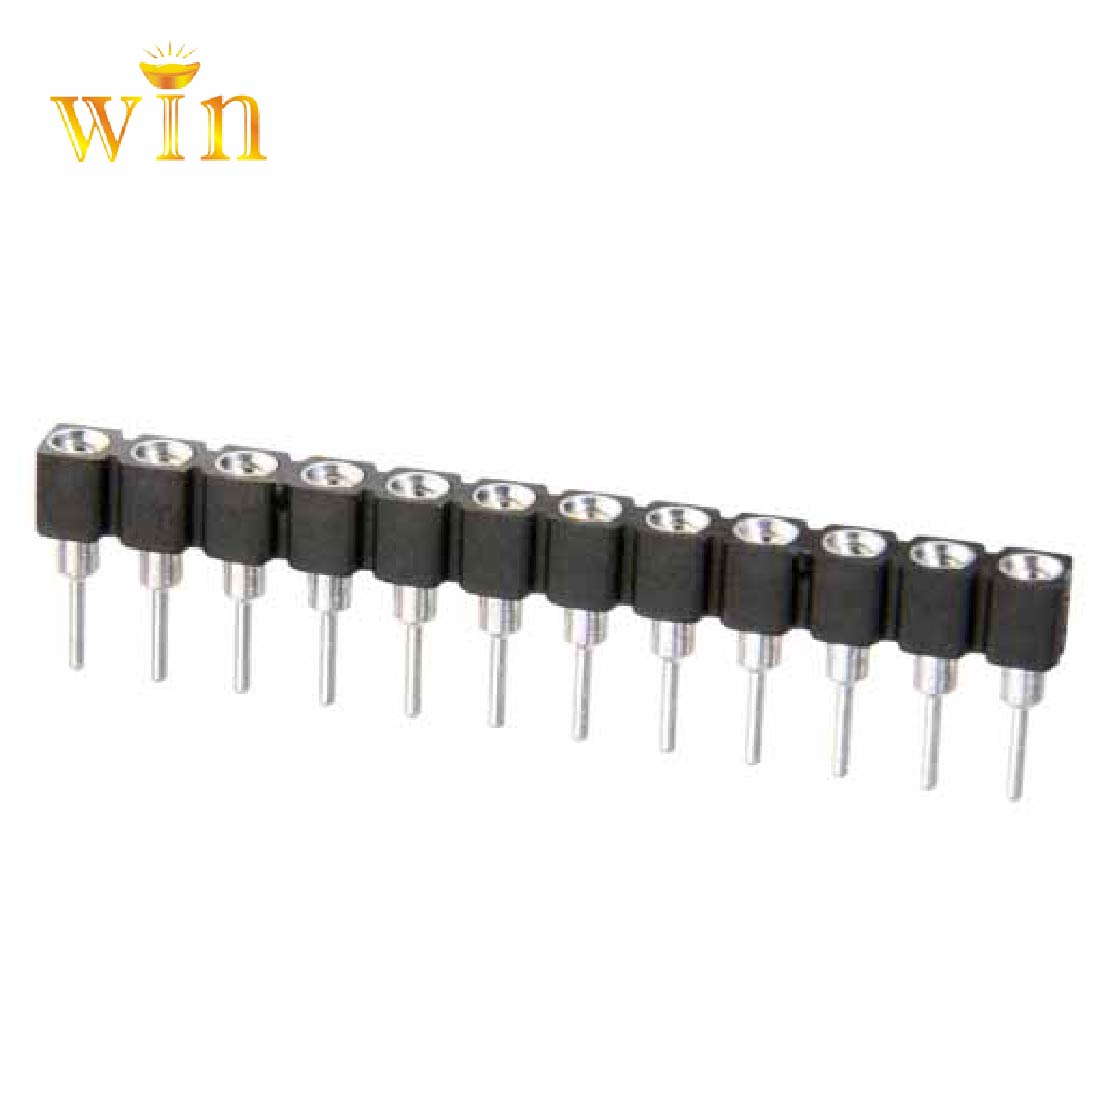 2.54 Machined Female Header 1x4P suits for LED LAMP